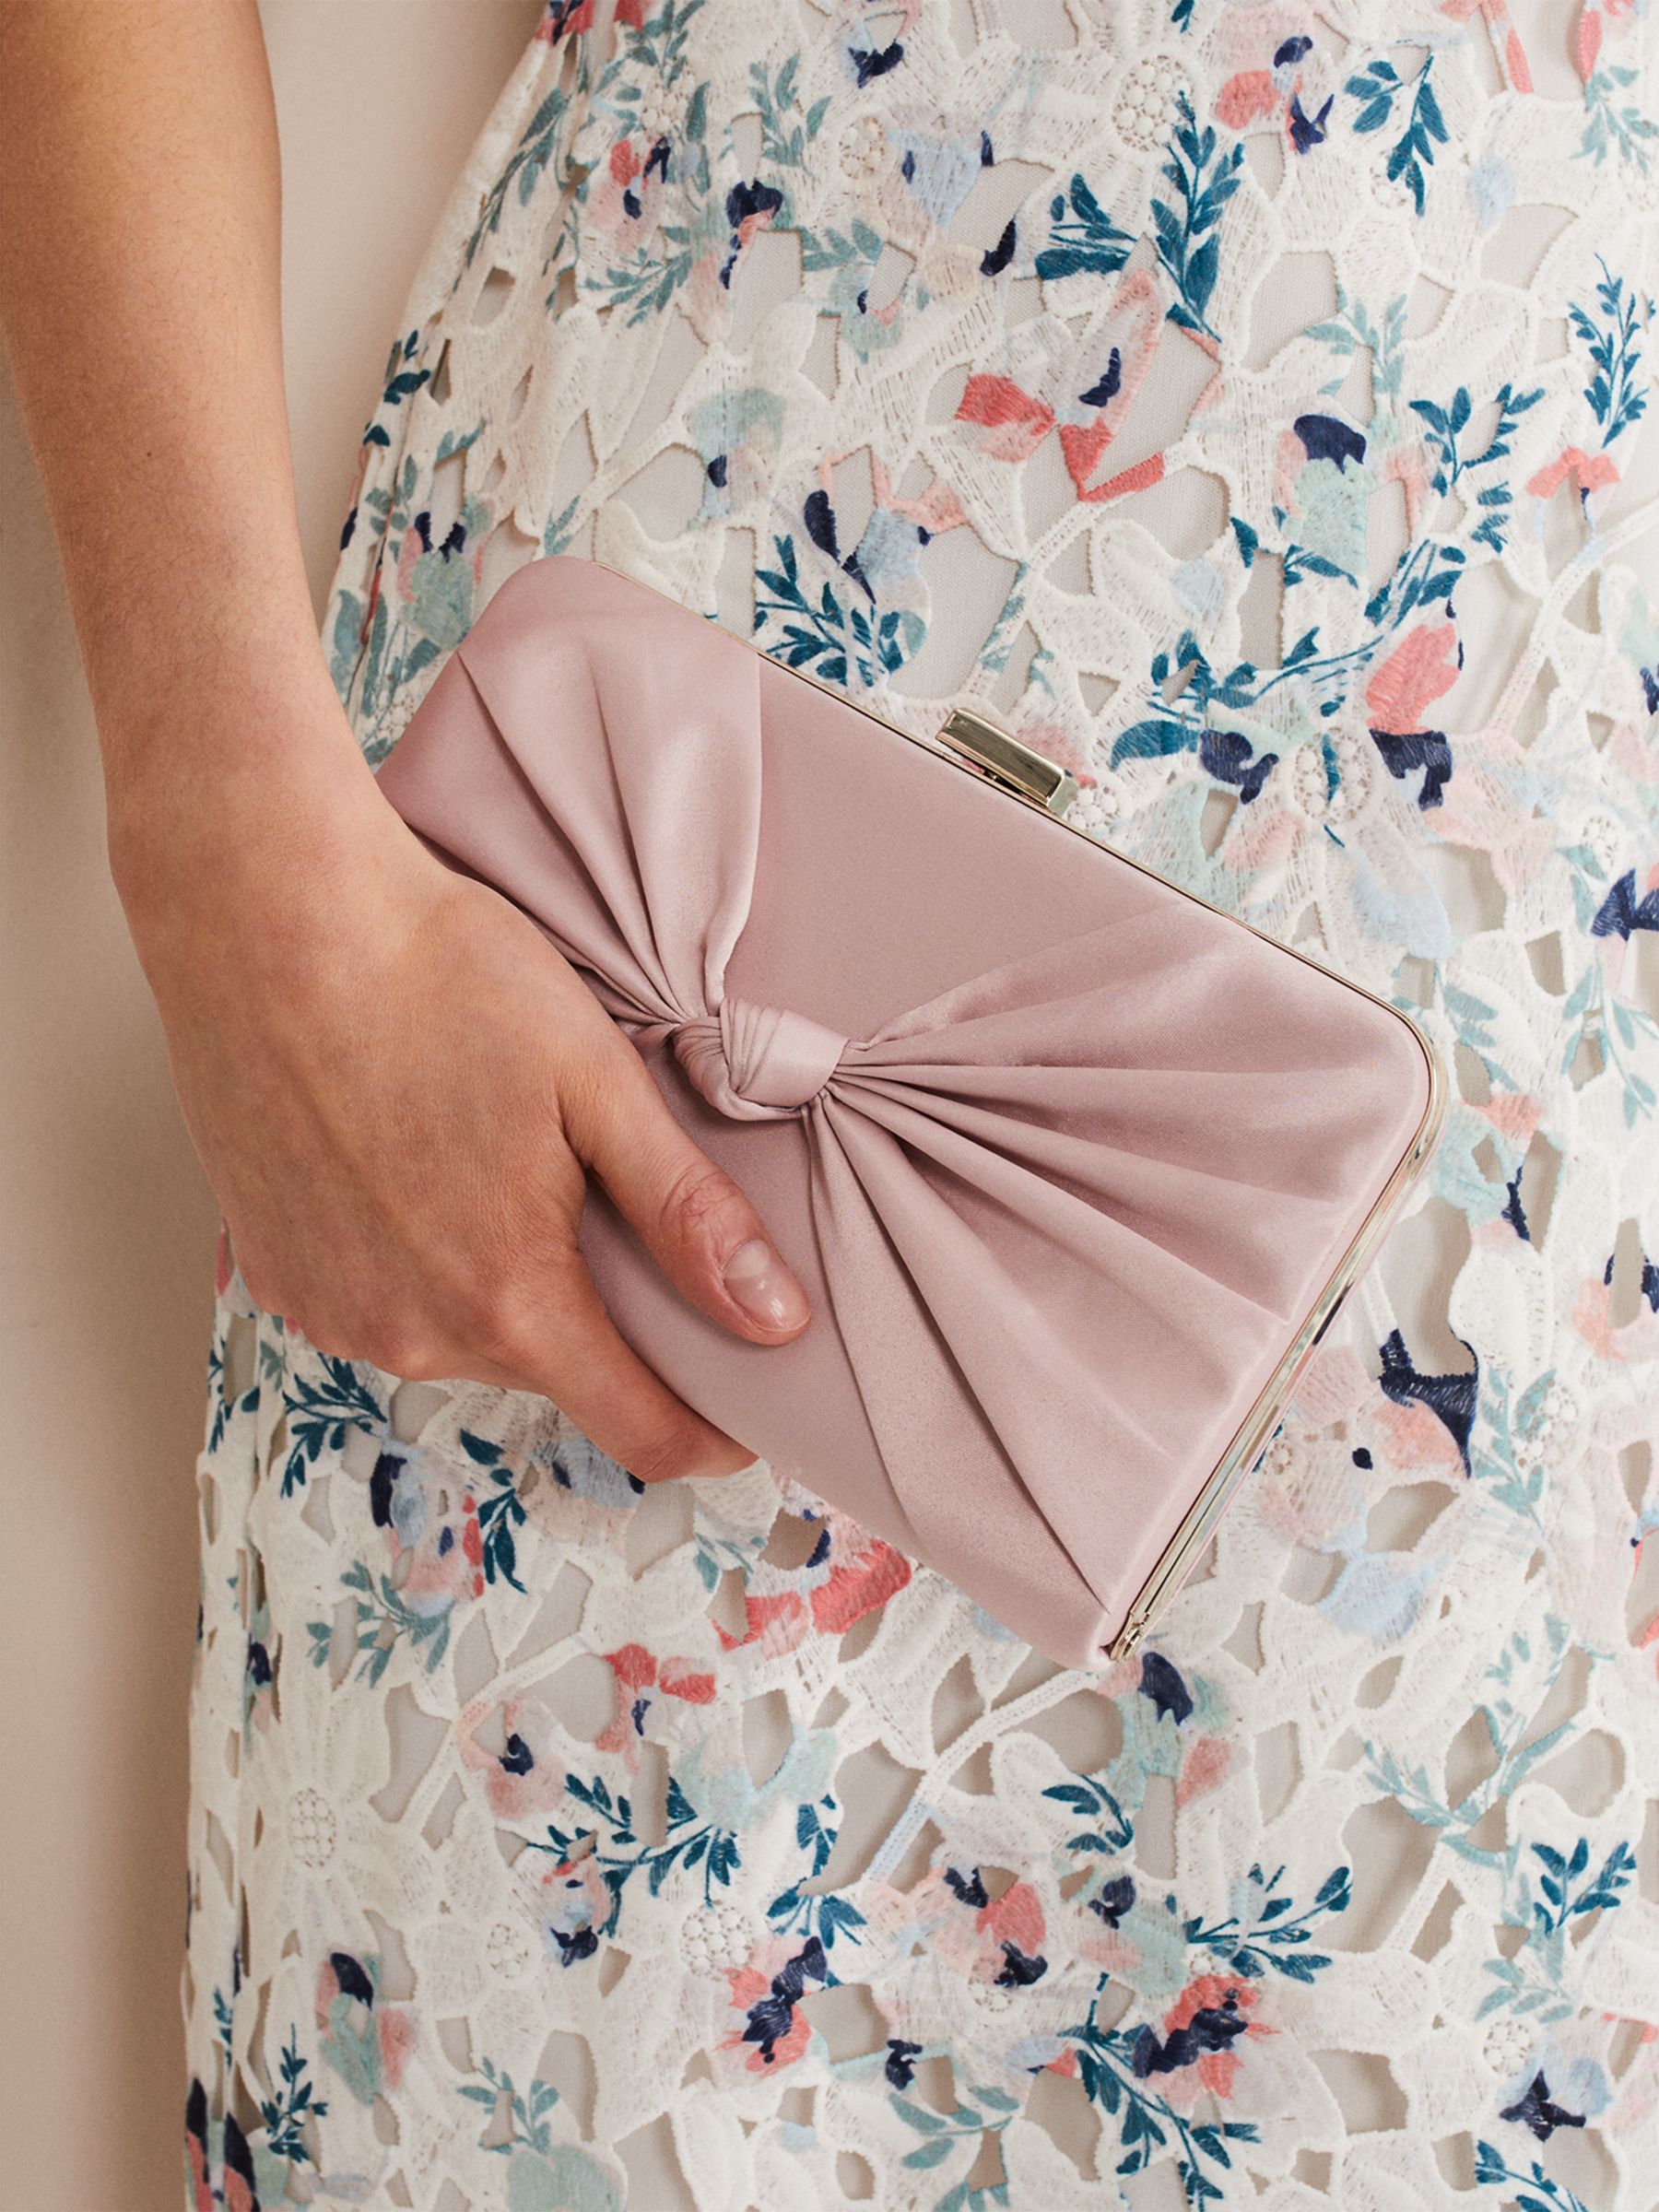 Buy Phase Eight Satin Knot Front Box Clutch Bag Online at johnlewis.com